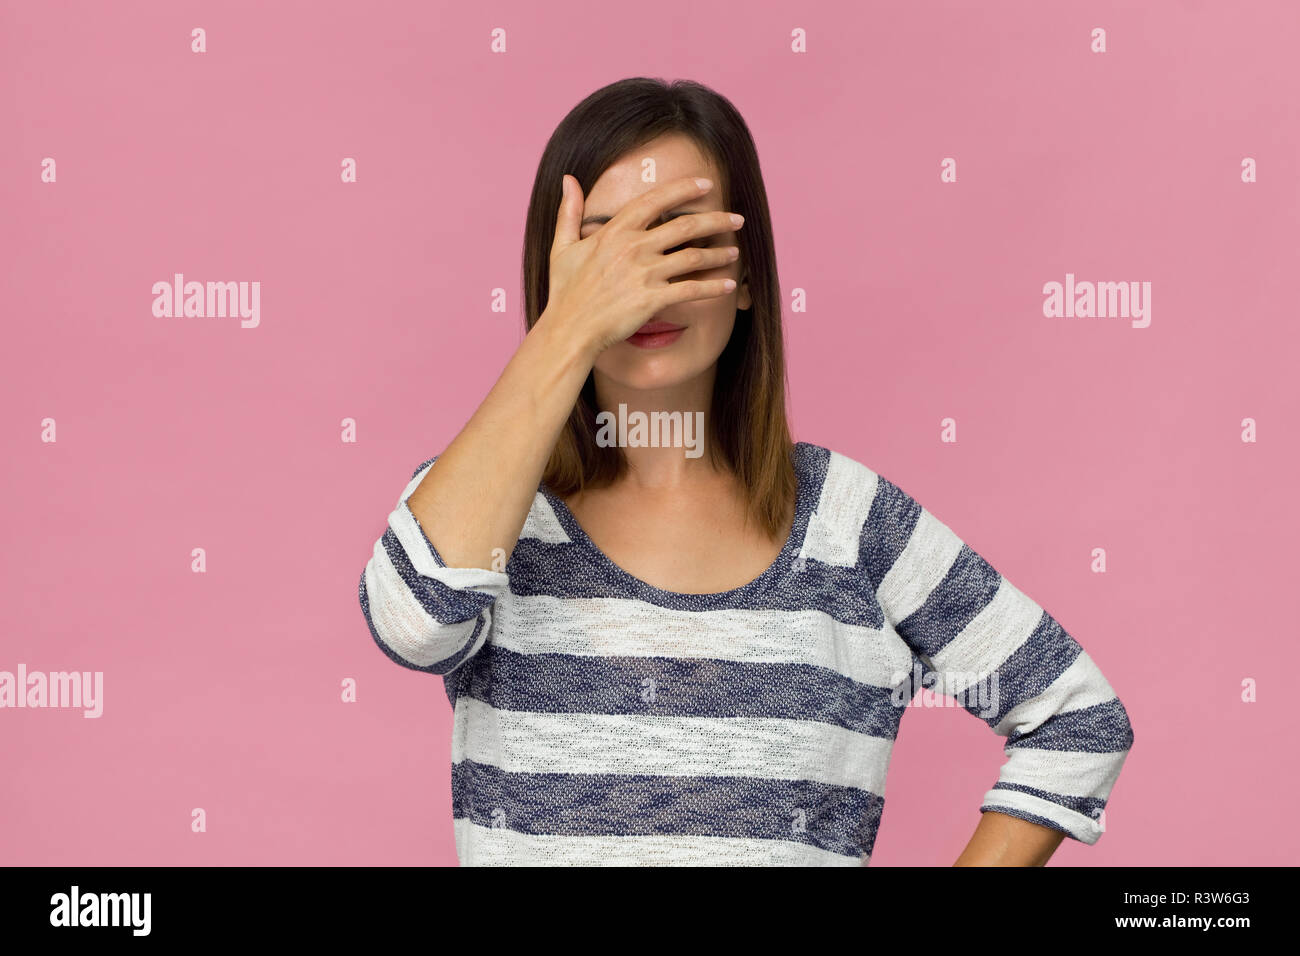 Young woman in depression cover her eyes with hand. Stop gesture Stock Photo